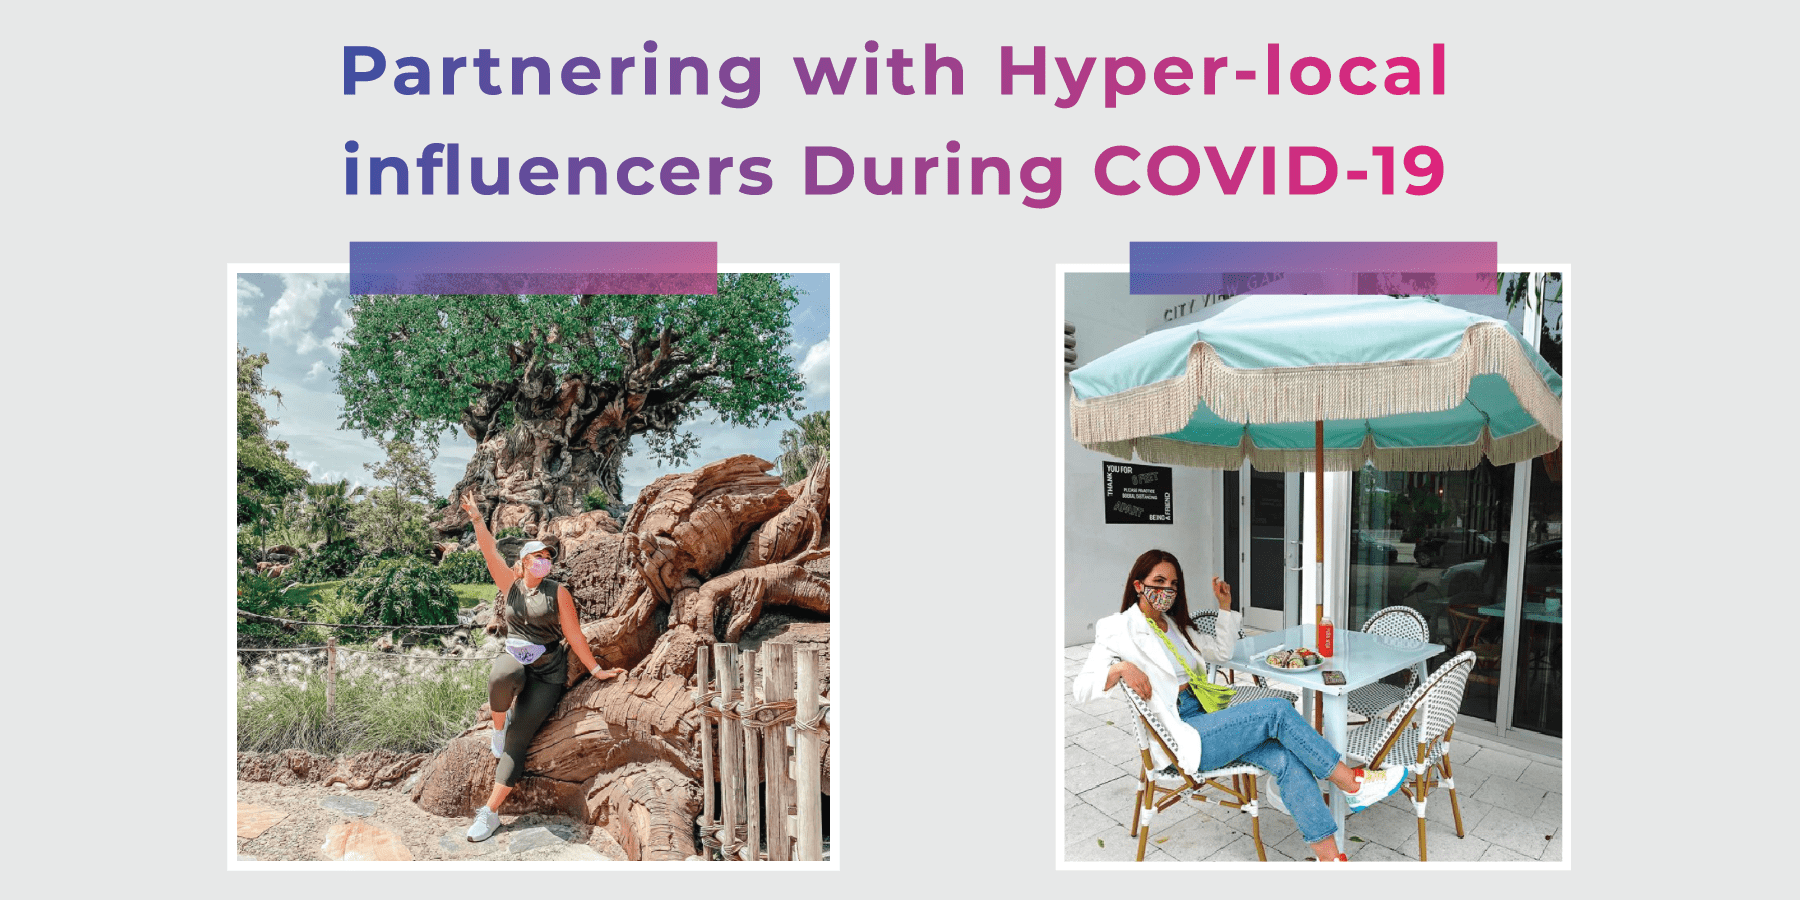 Partnering with Hyper-local Influencers During COVID-19